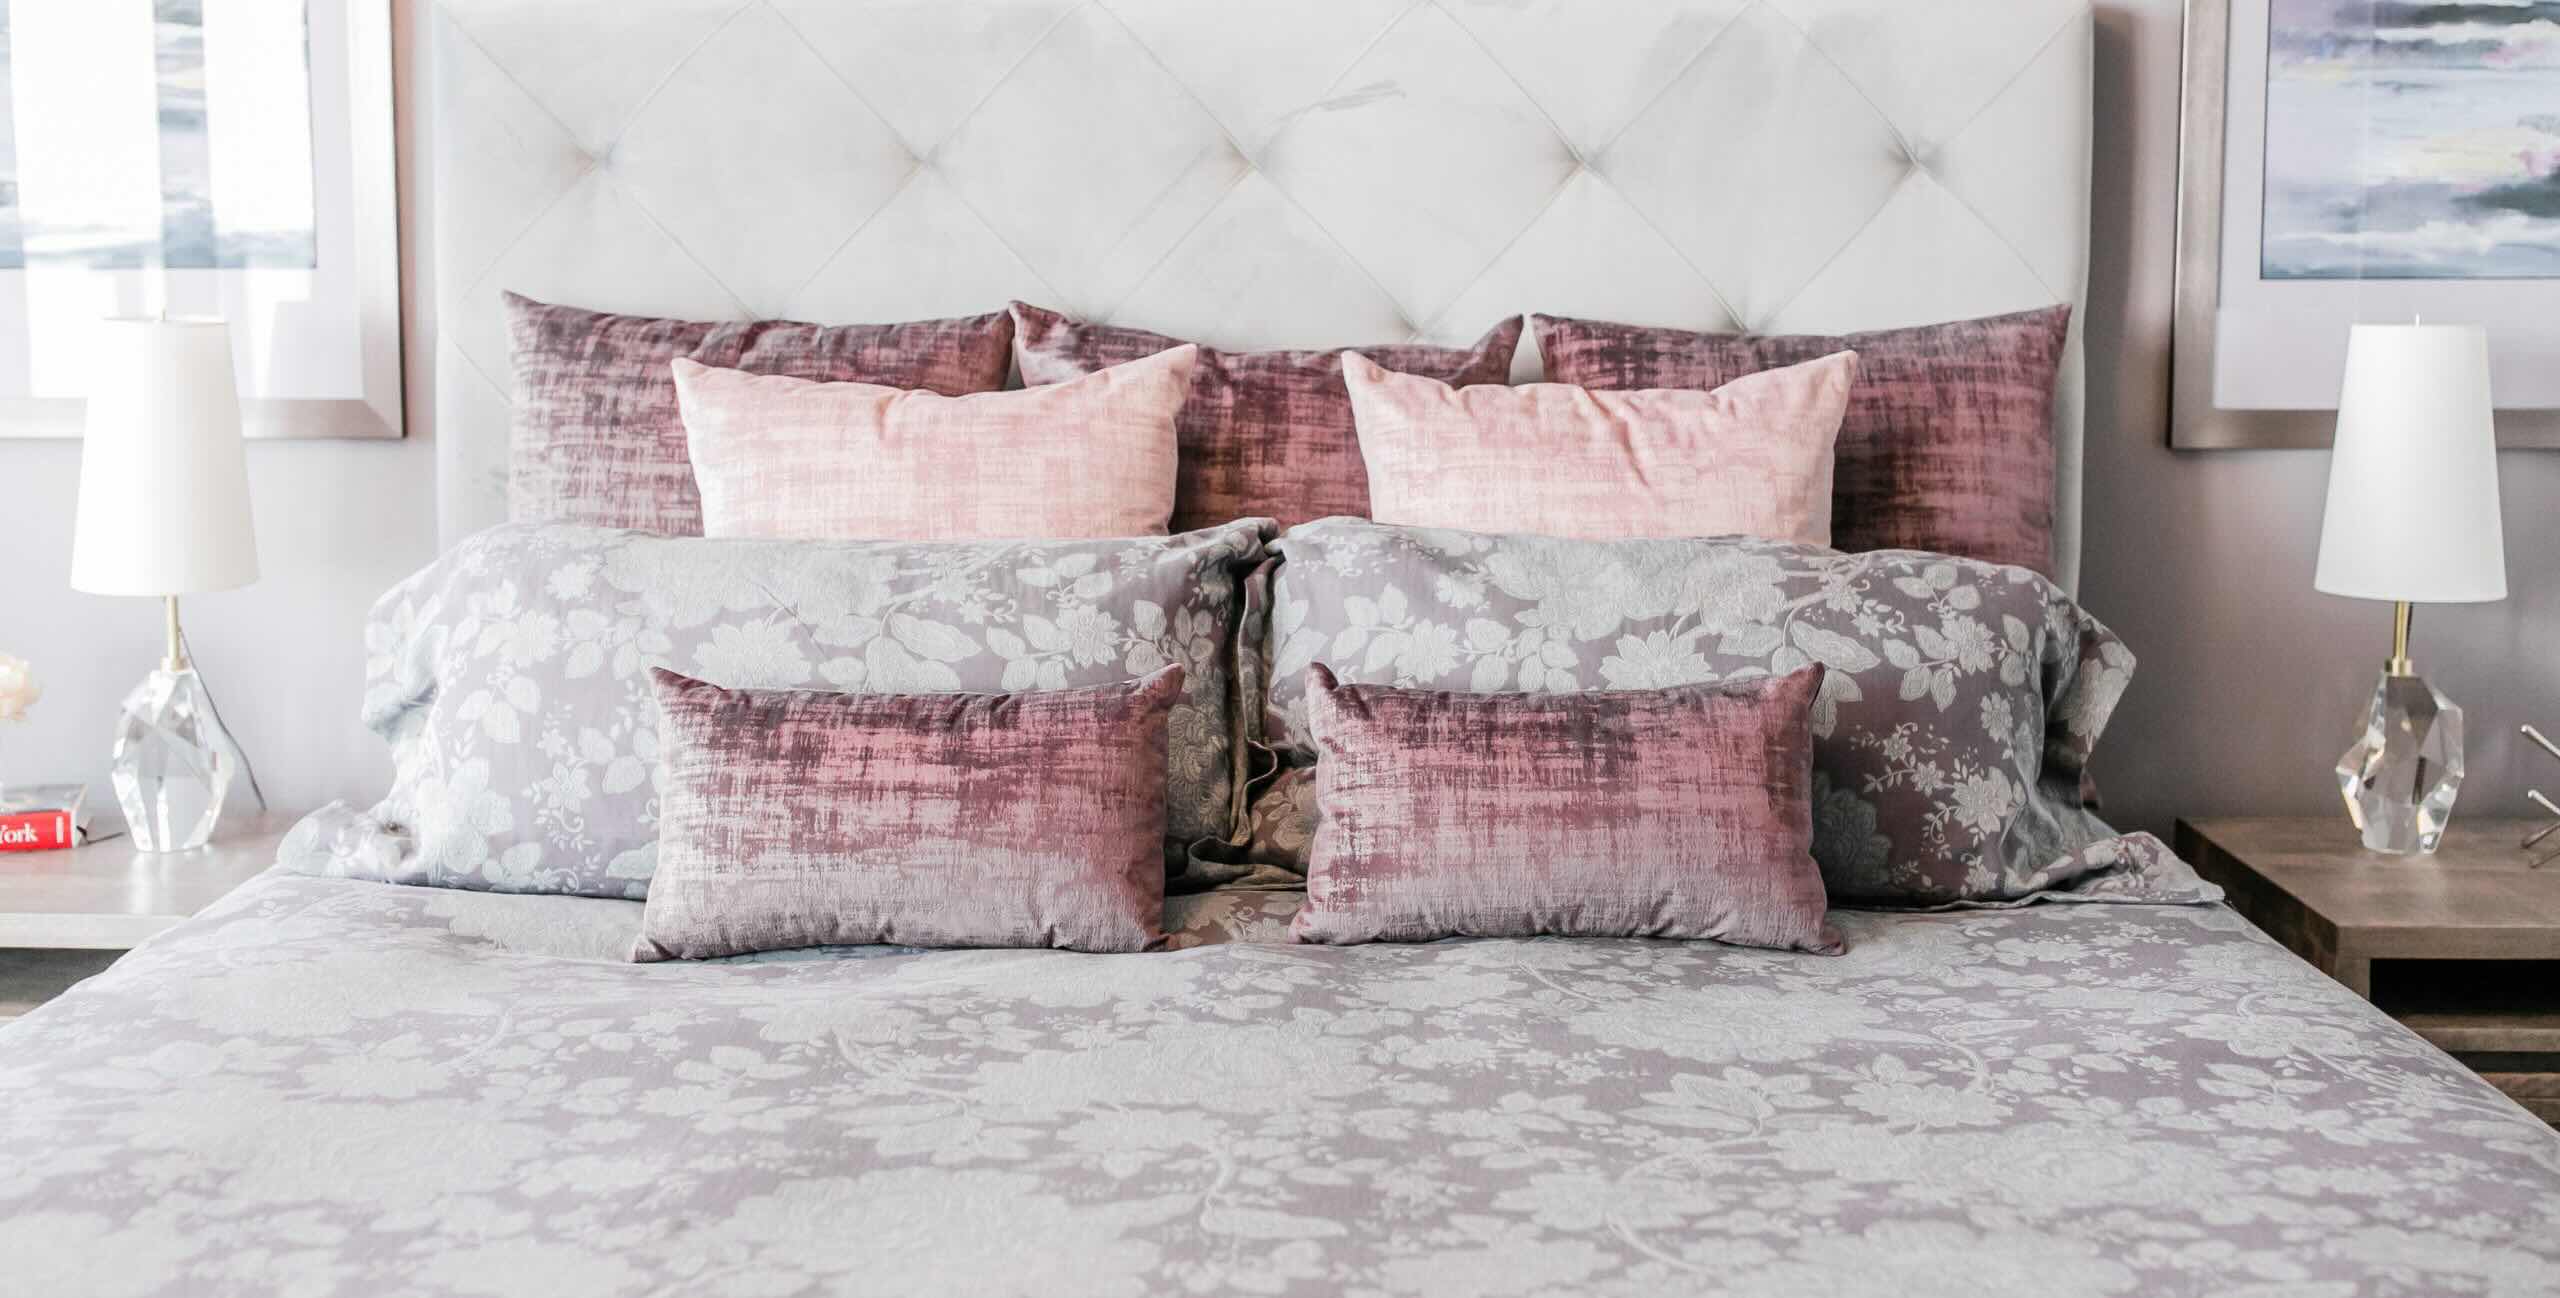 How To Arrange Decorative Pillows On Bed